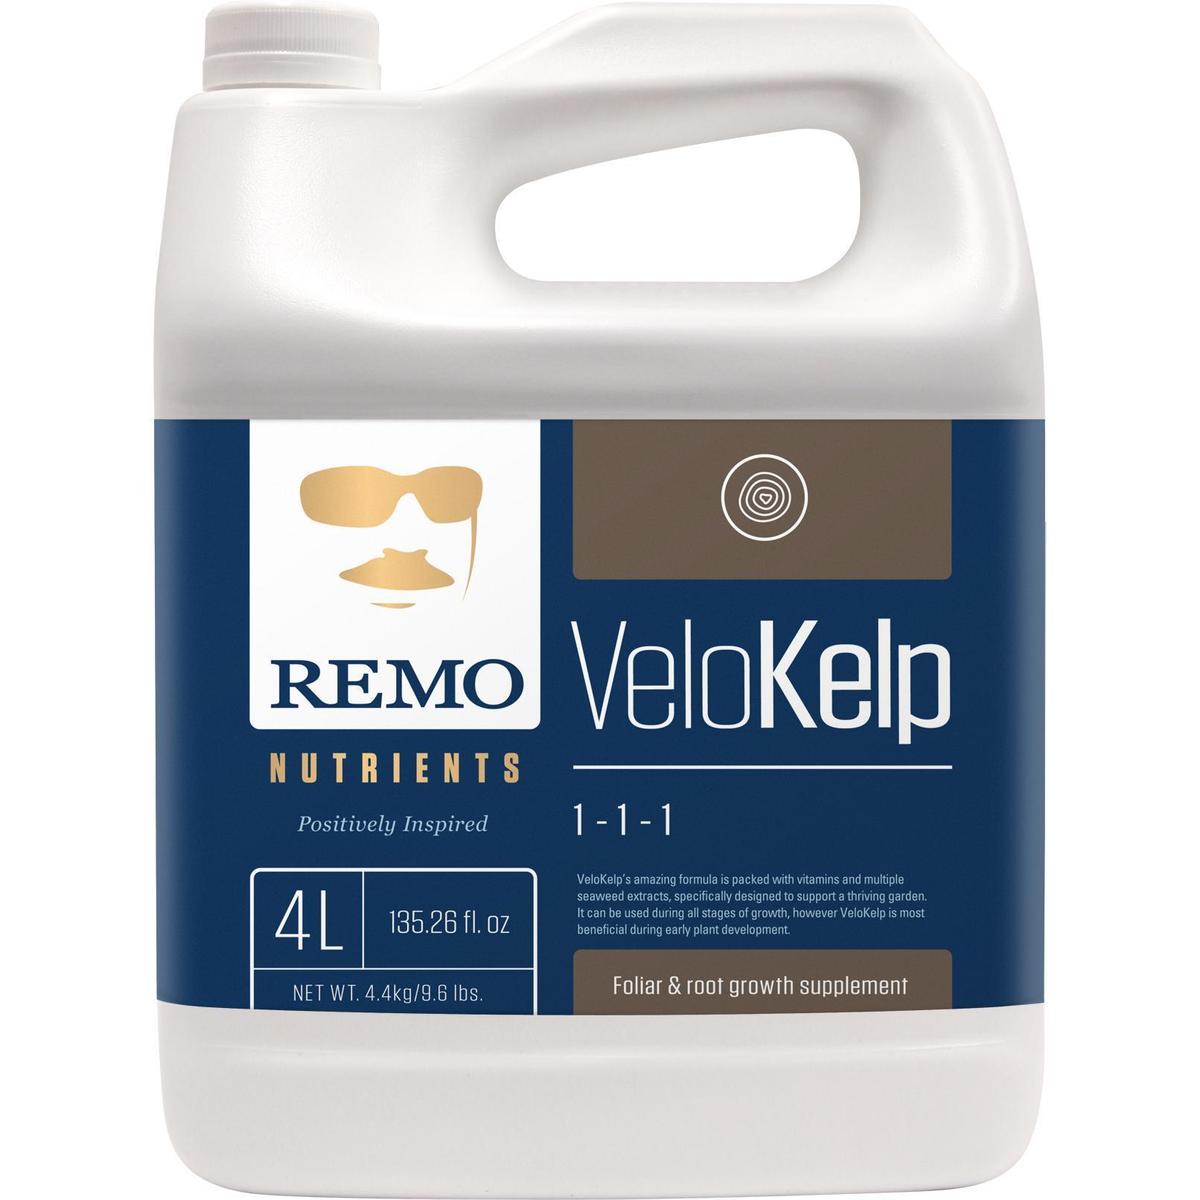 Product Secondary Image:Remo Nutrients VeloKelp (1-1-1)